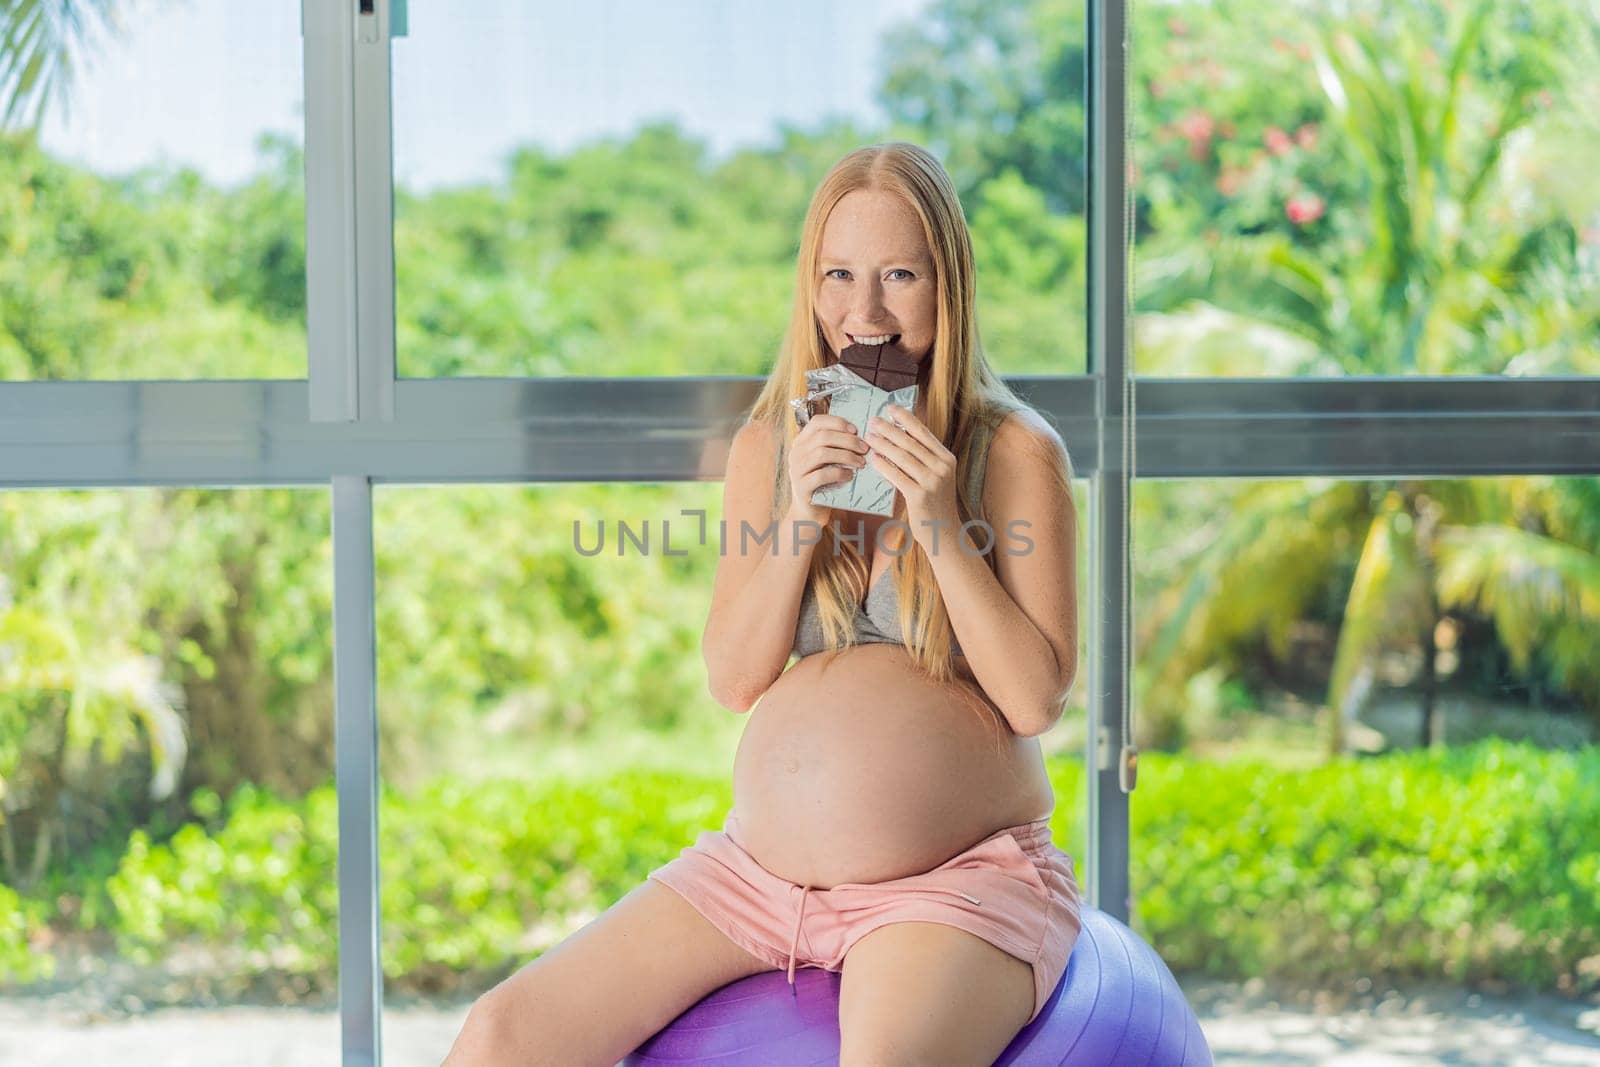 Capturing a pregnant woman enjoying chocolate, exploring the sweet indulgence during pregnancy, highlighting the delightful moments and potential effects of chocolate.